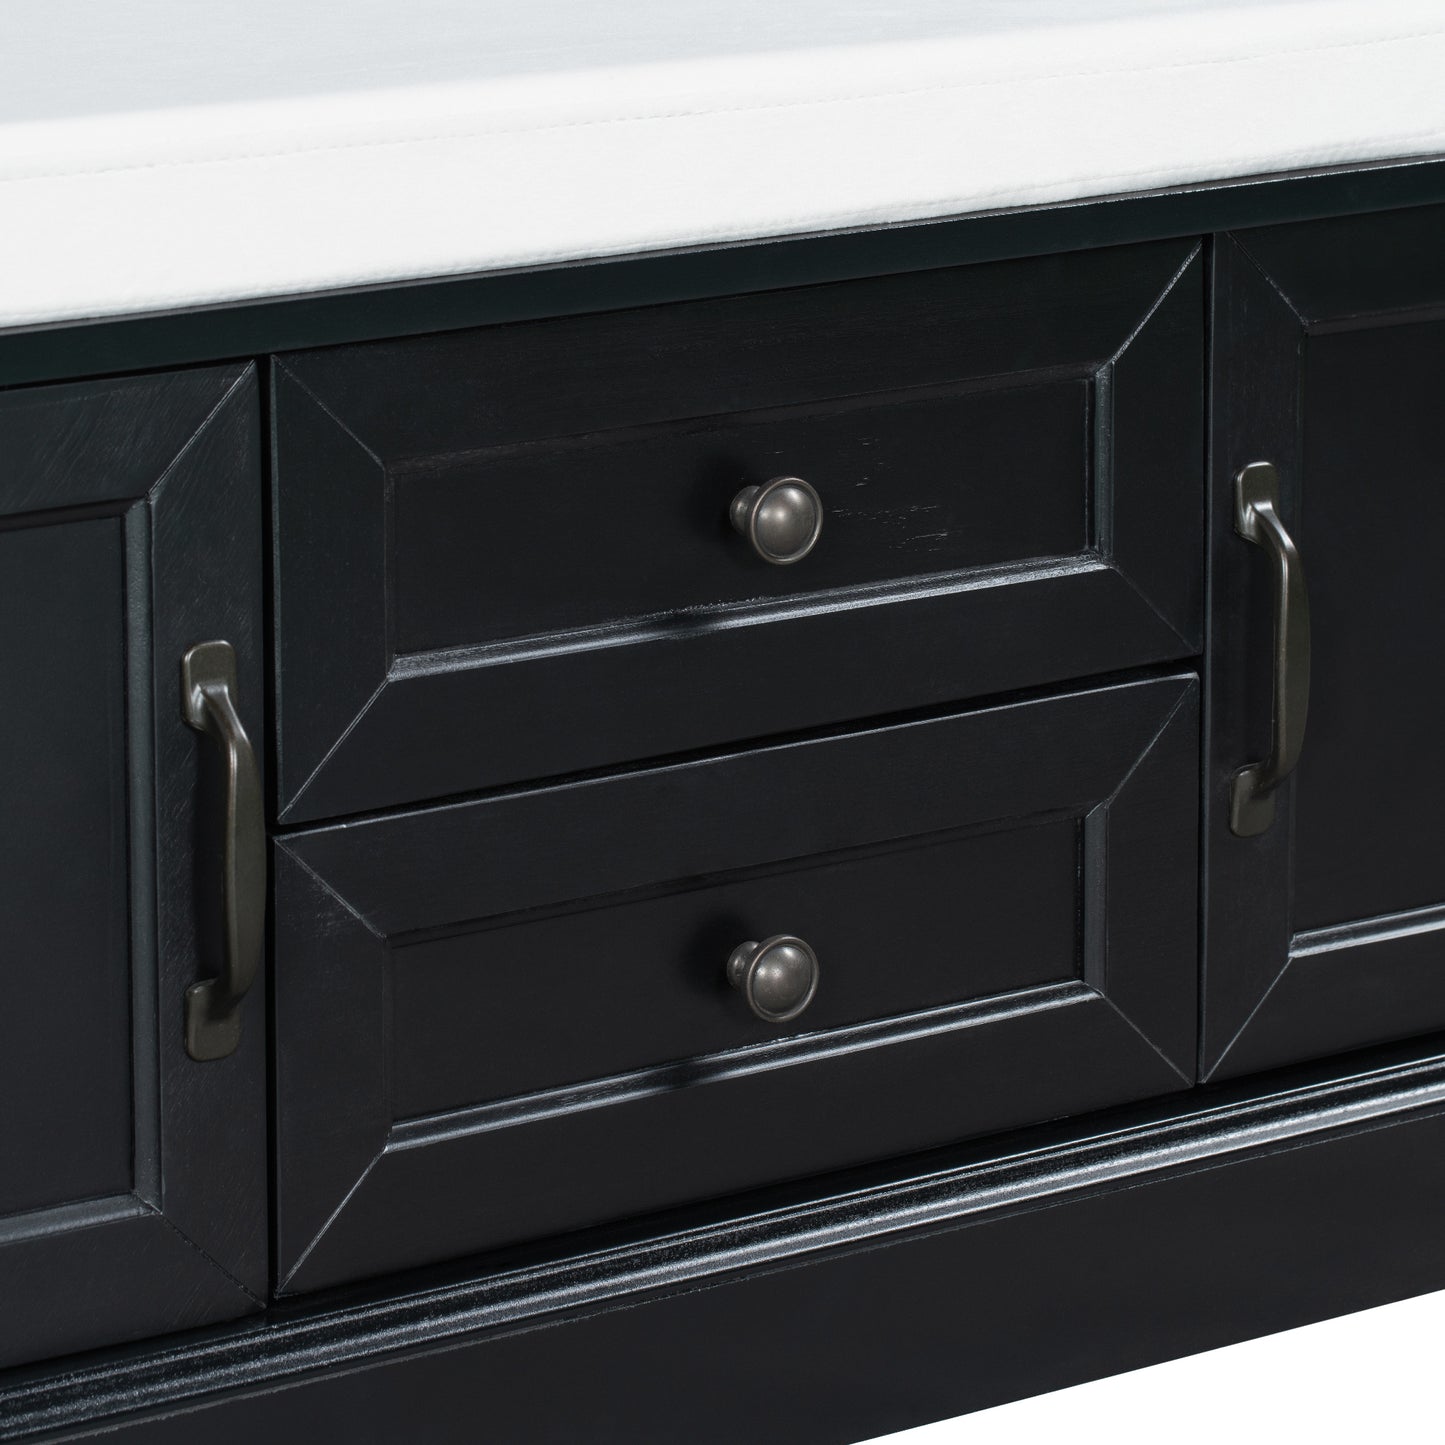 TREXM Storage Bench with 2 Drawers and 2 Cabinets - Black